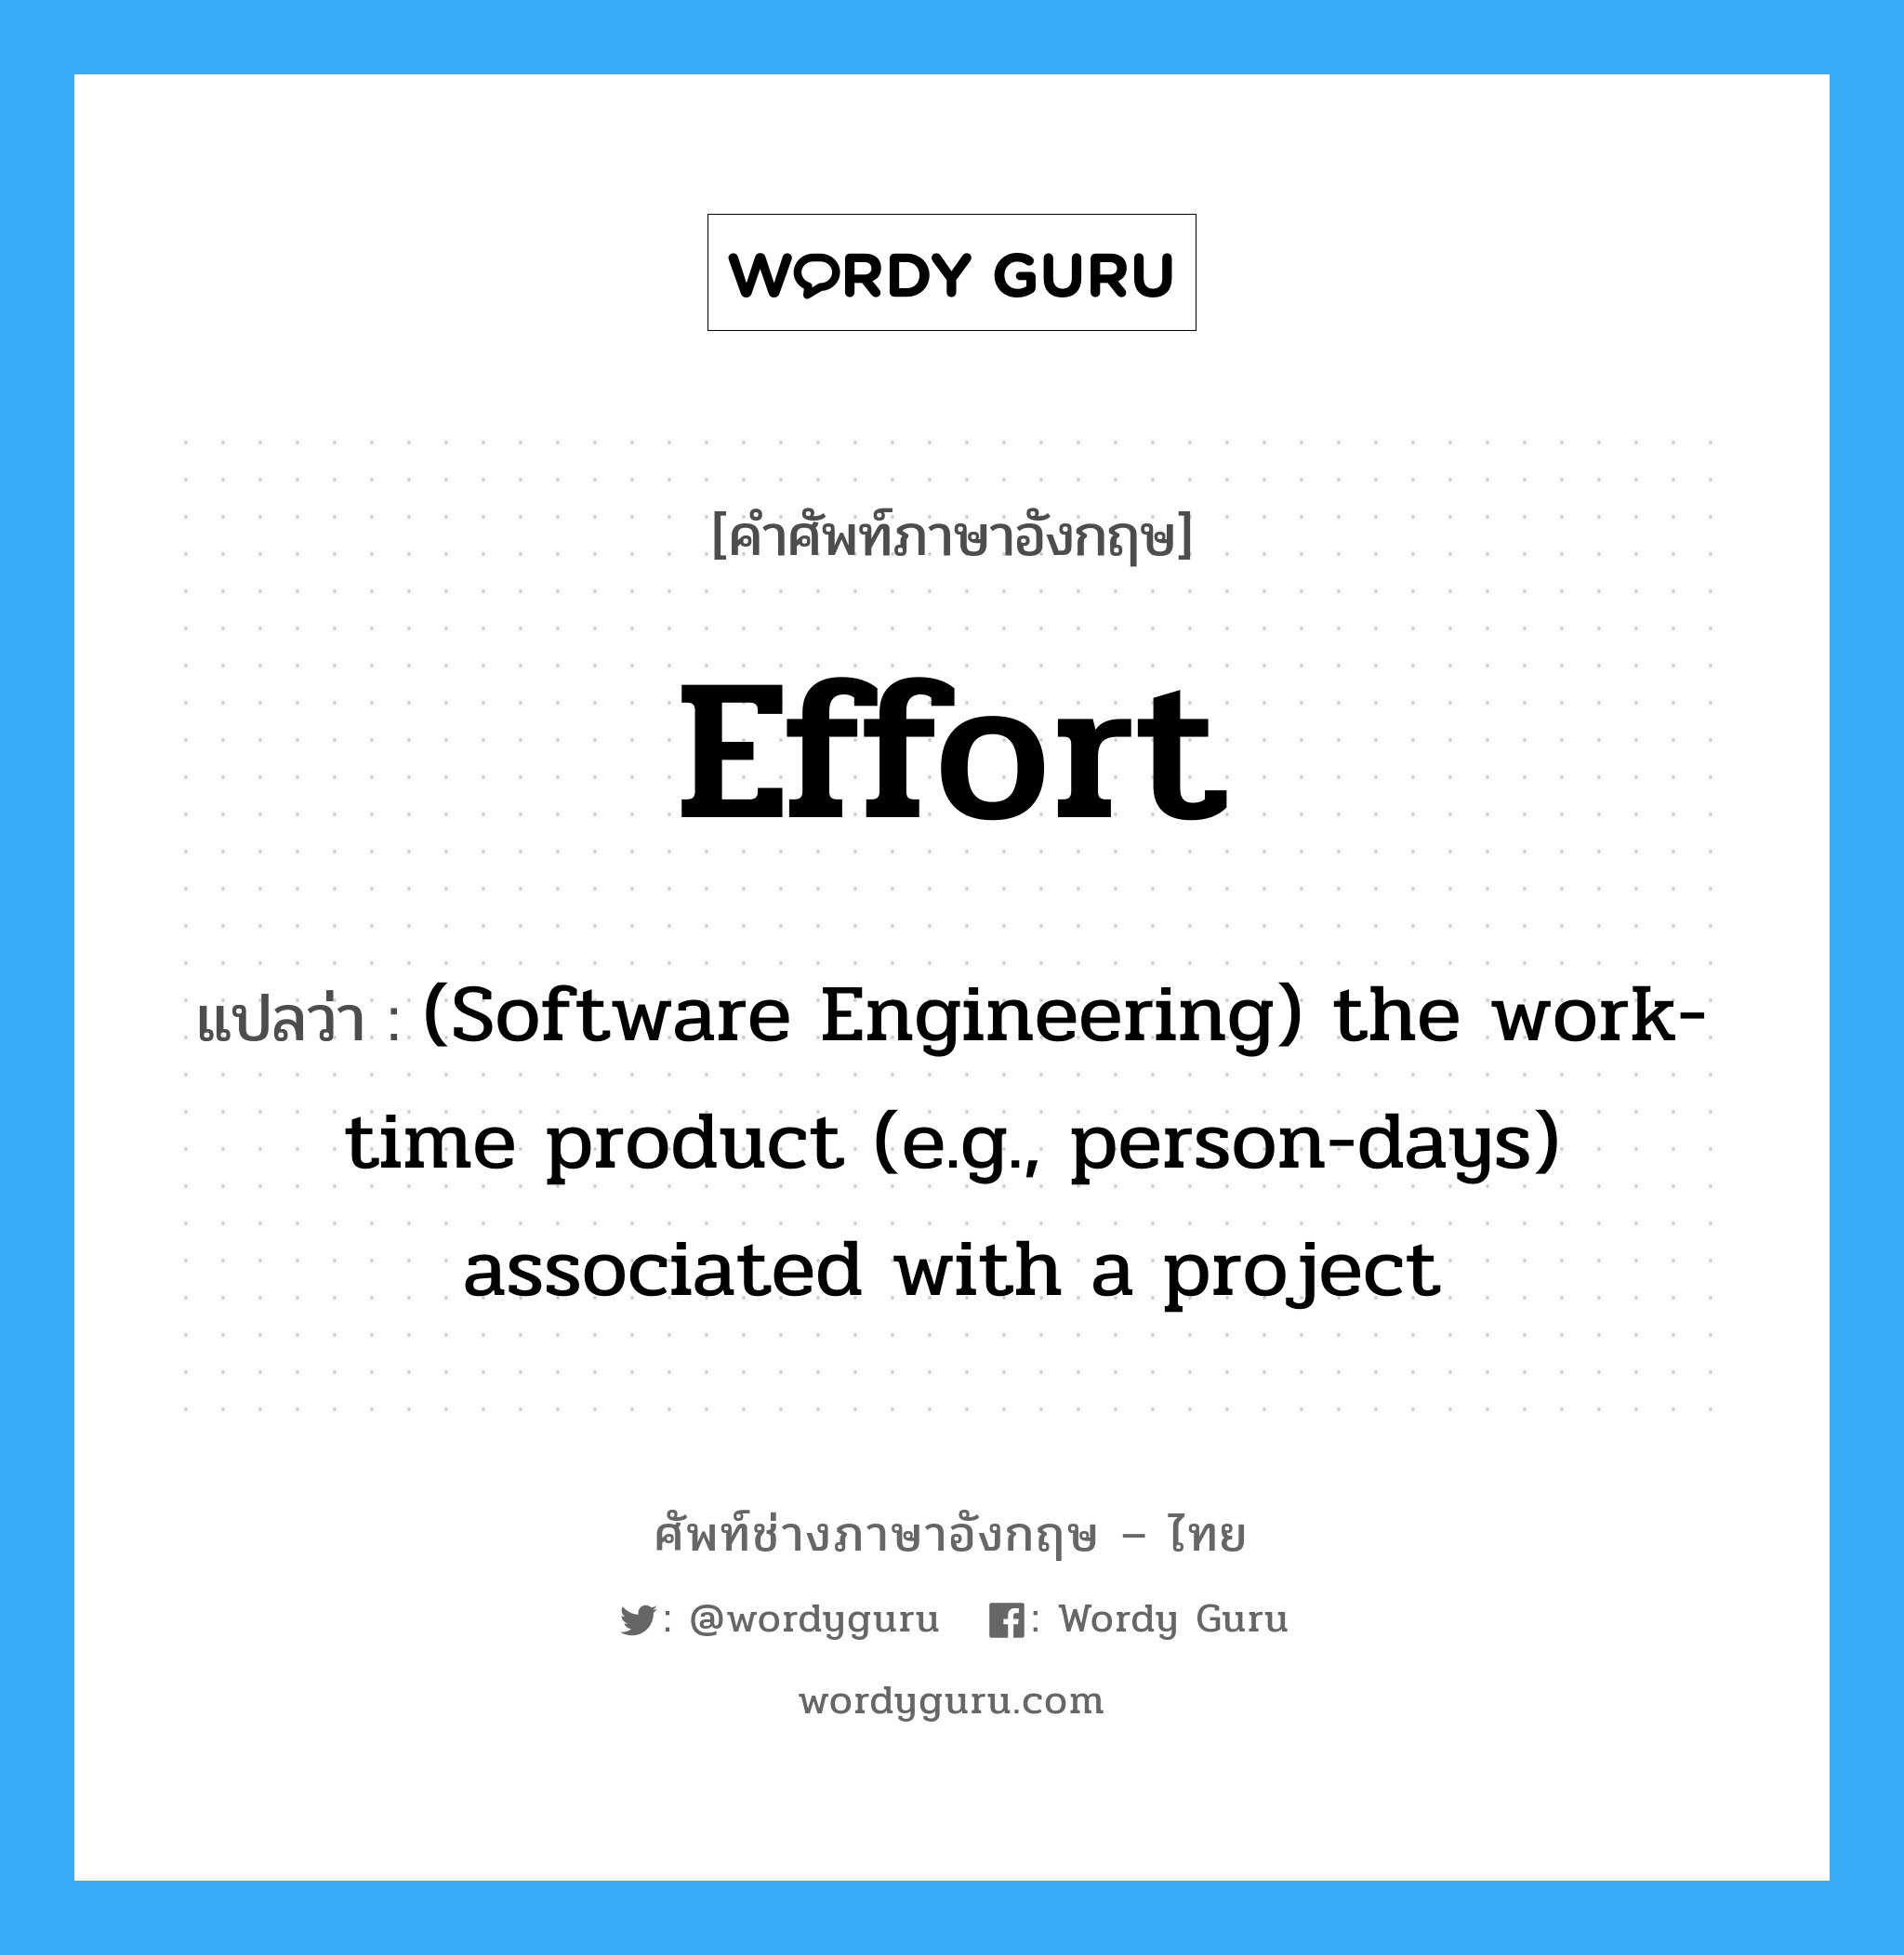 Effort แปลว่า?, คำศัพท์ช่างภาษาอังกฤษ - ไทย Effort คำศัพท์ภาษาอังกฤษ Effort แปลว่า (Software Engineering) the work-time product (e.g., person-days) associated with a project